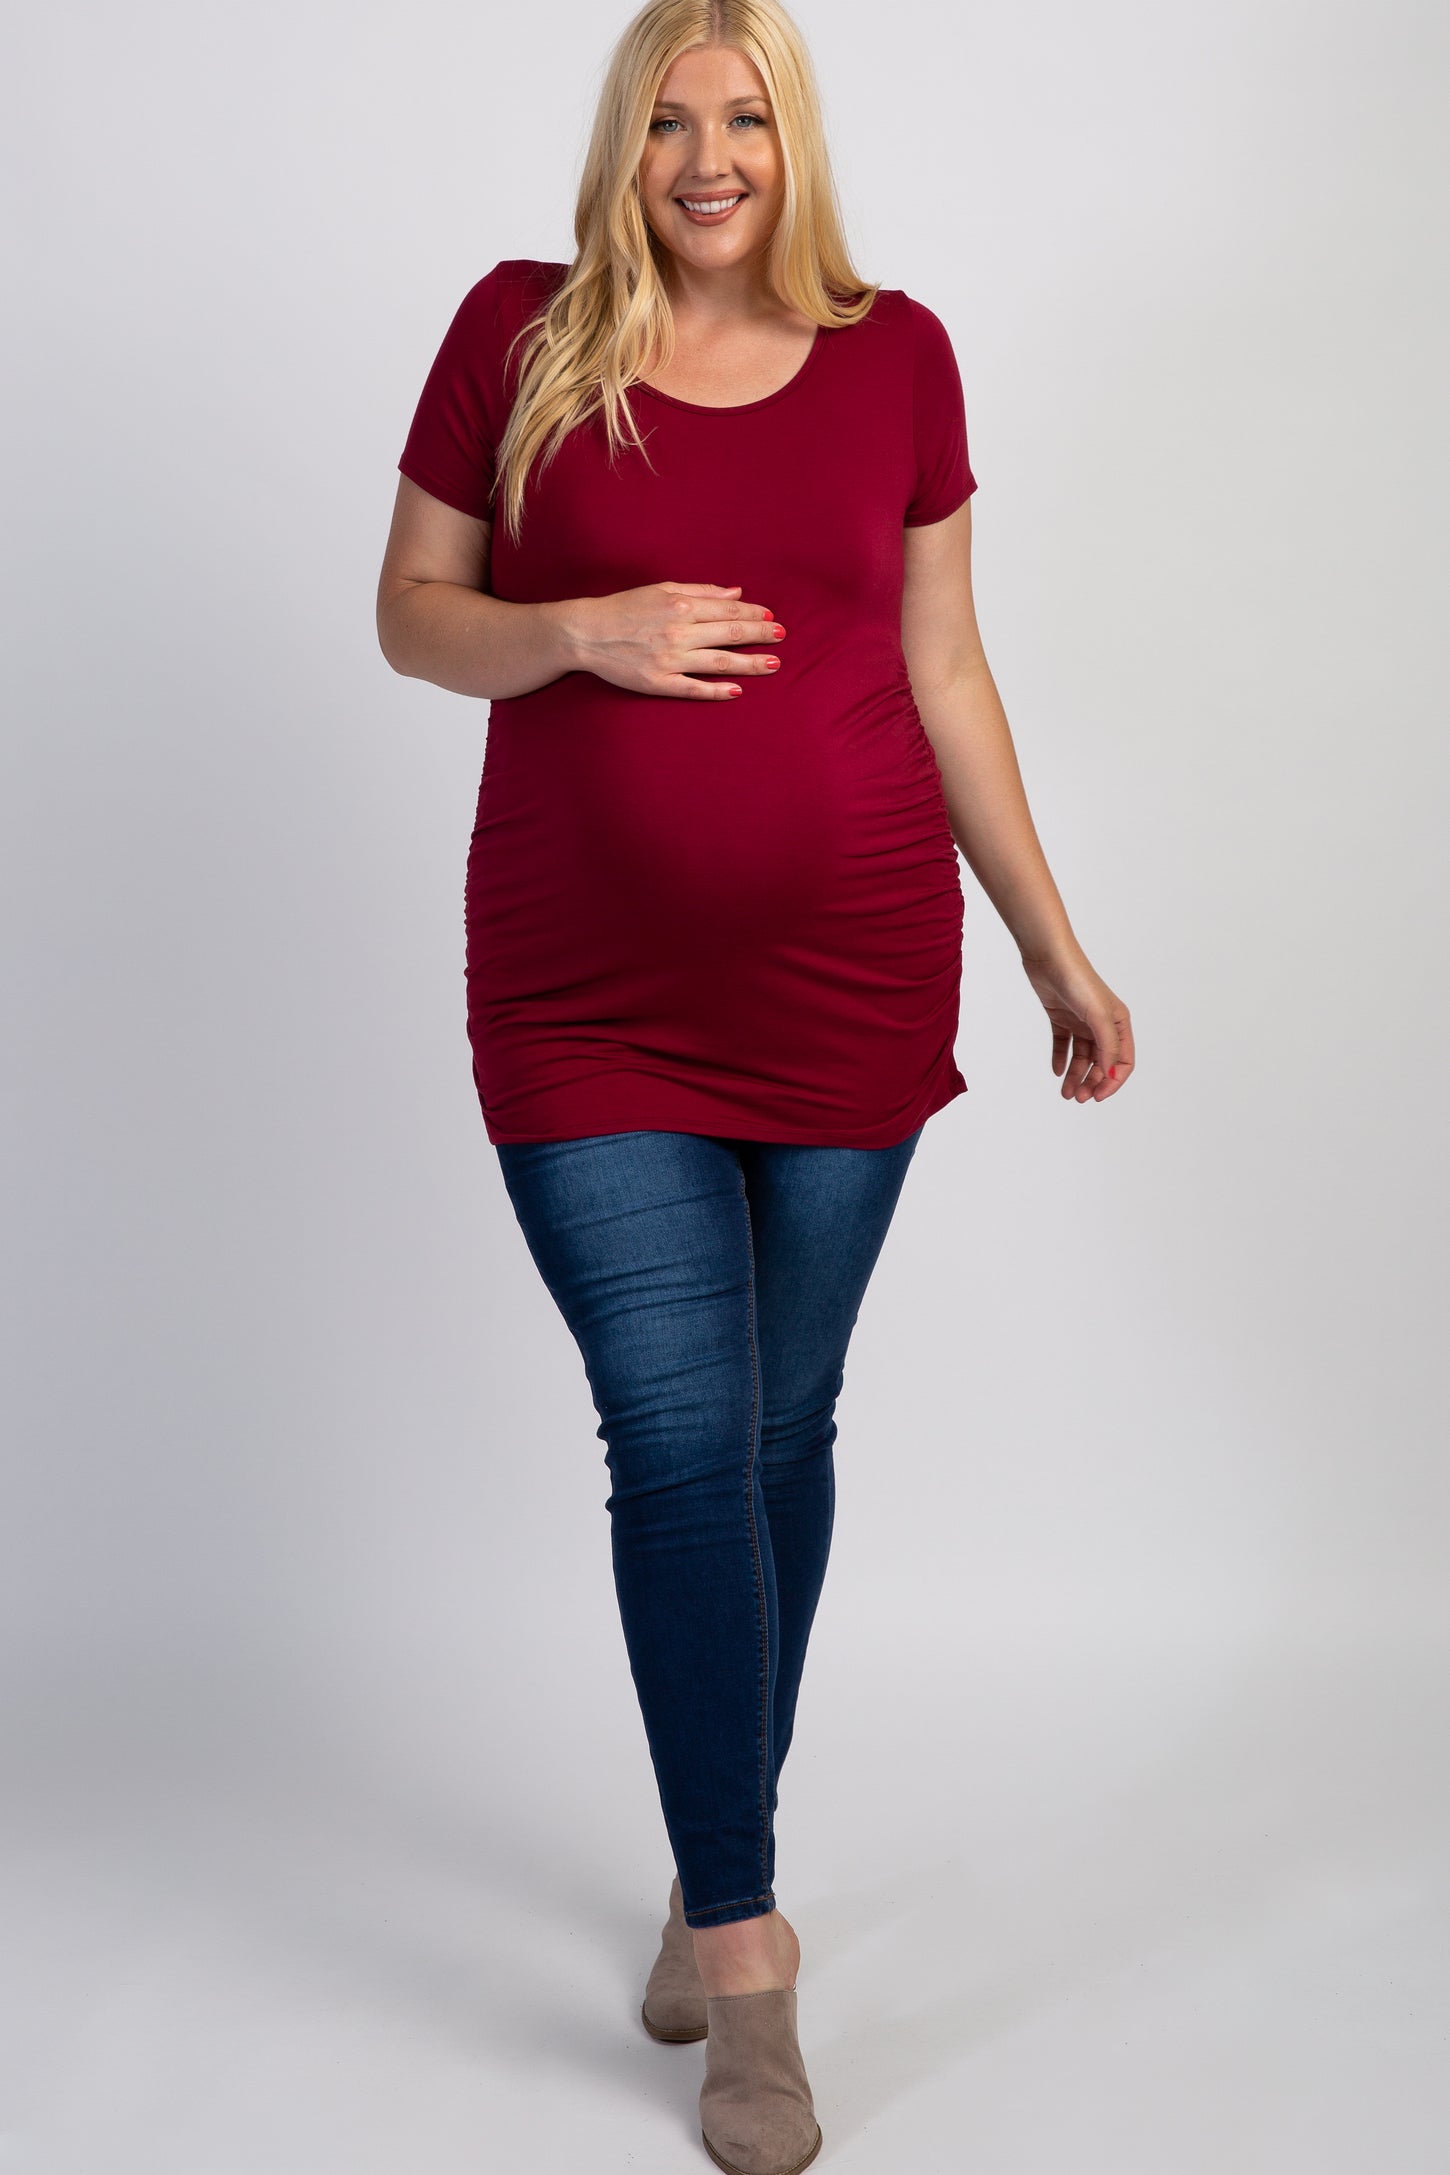 PinkBlush Burgundy Ruched Short Sleeve Maternity Plus Top